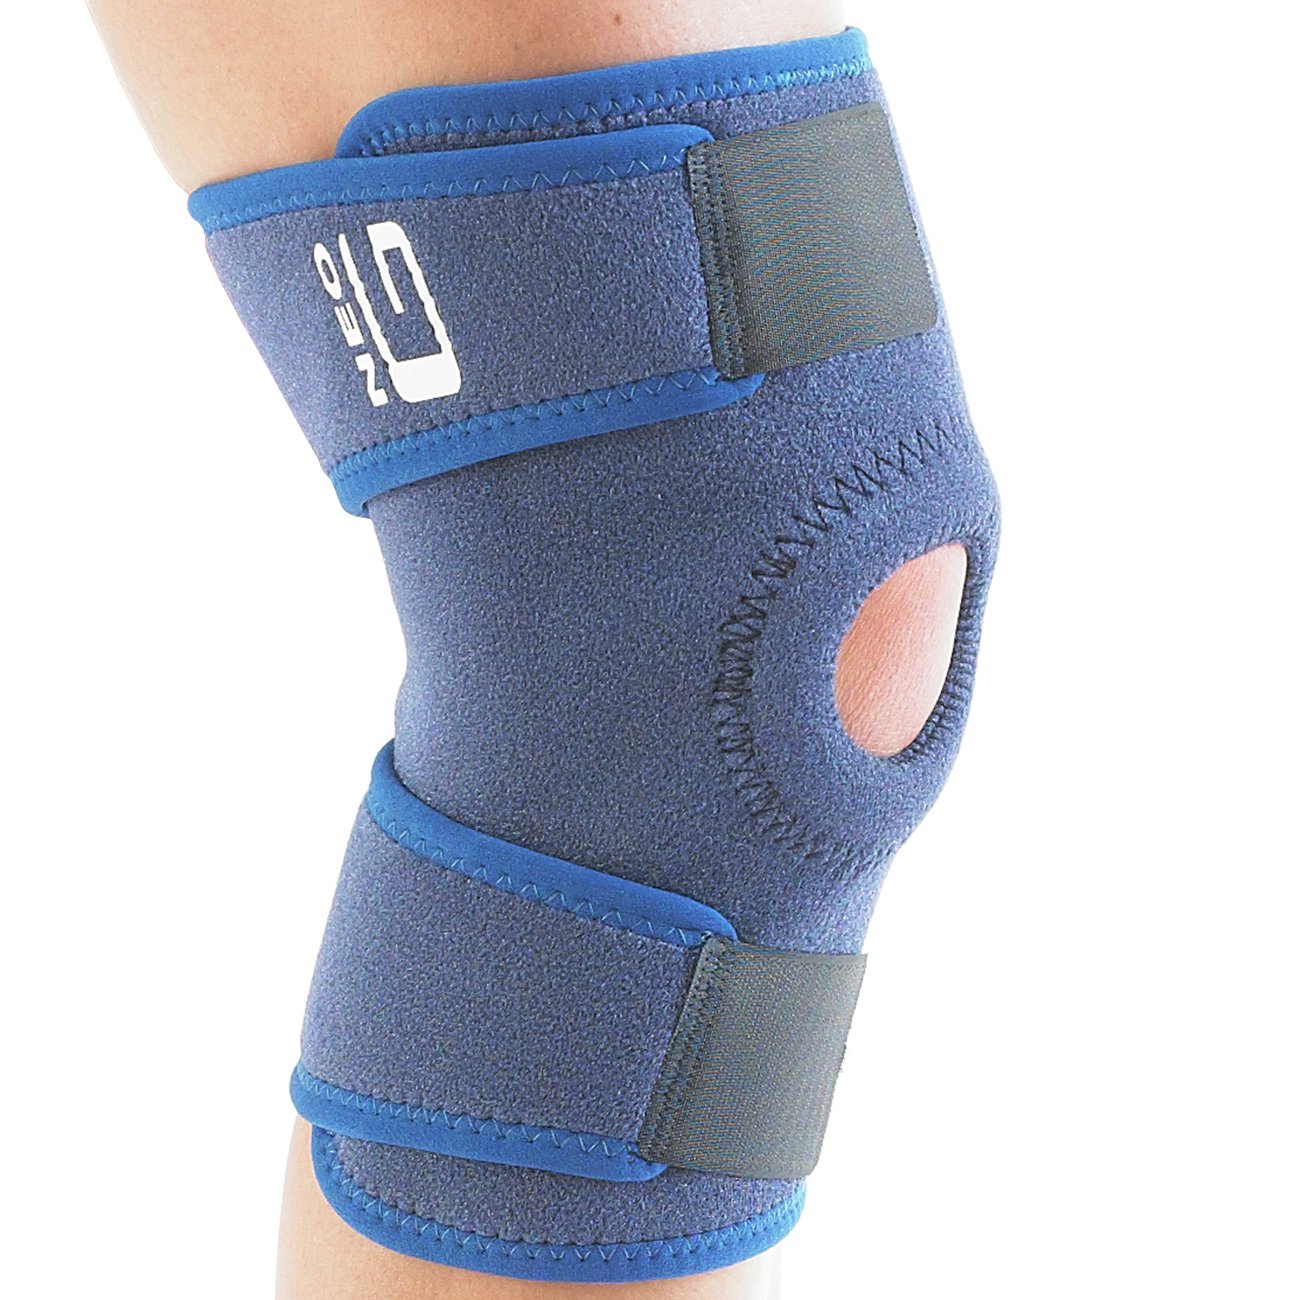 NEO G Open Knee Support Model 885 - One Size